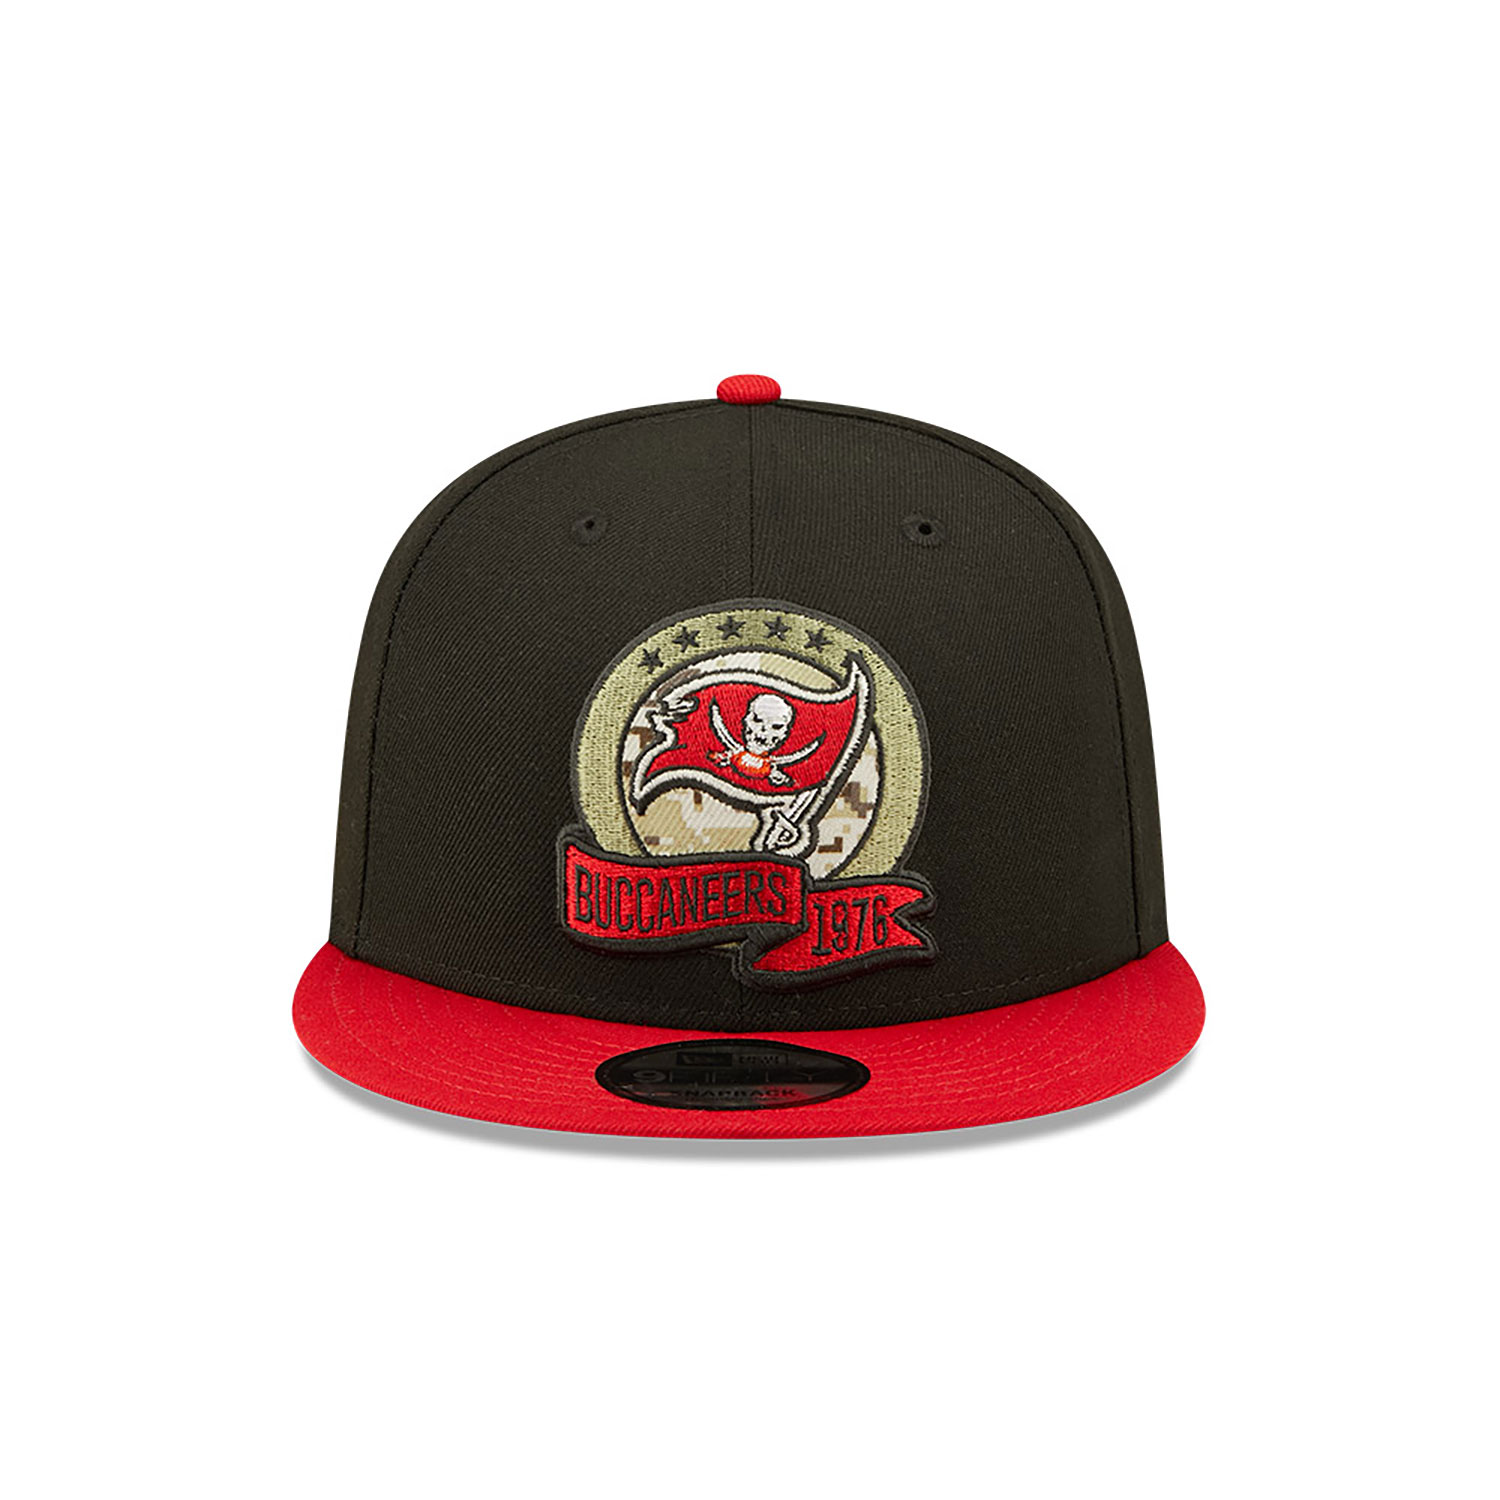 Official New Era NFL Salute To Service Tampa Bay Buccaneers Black 9FIFTY Cap  B8990_302 B8990_302 B8990_302